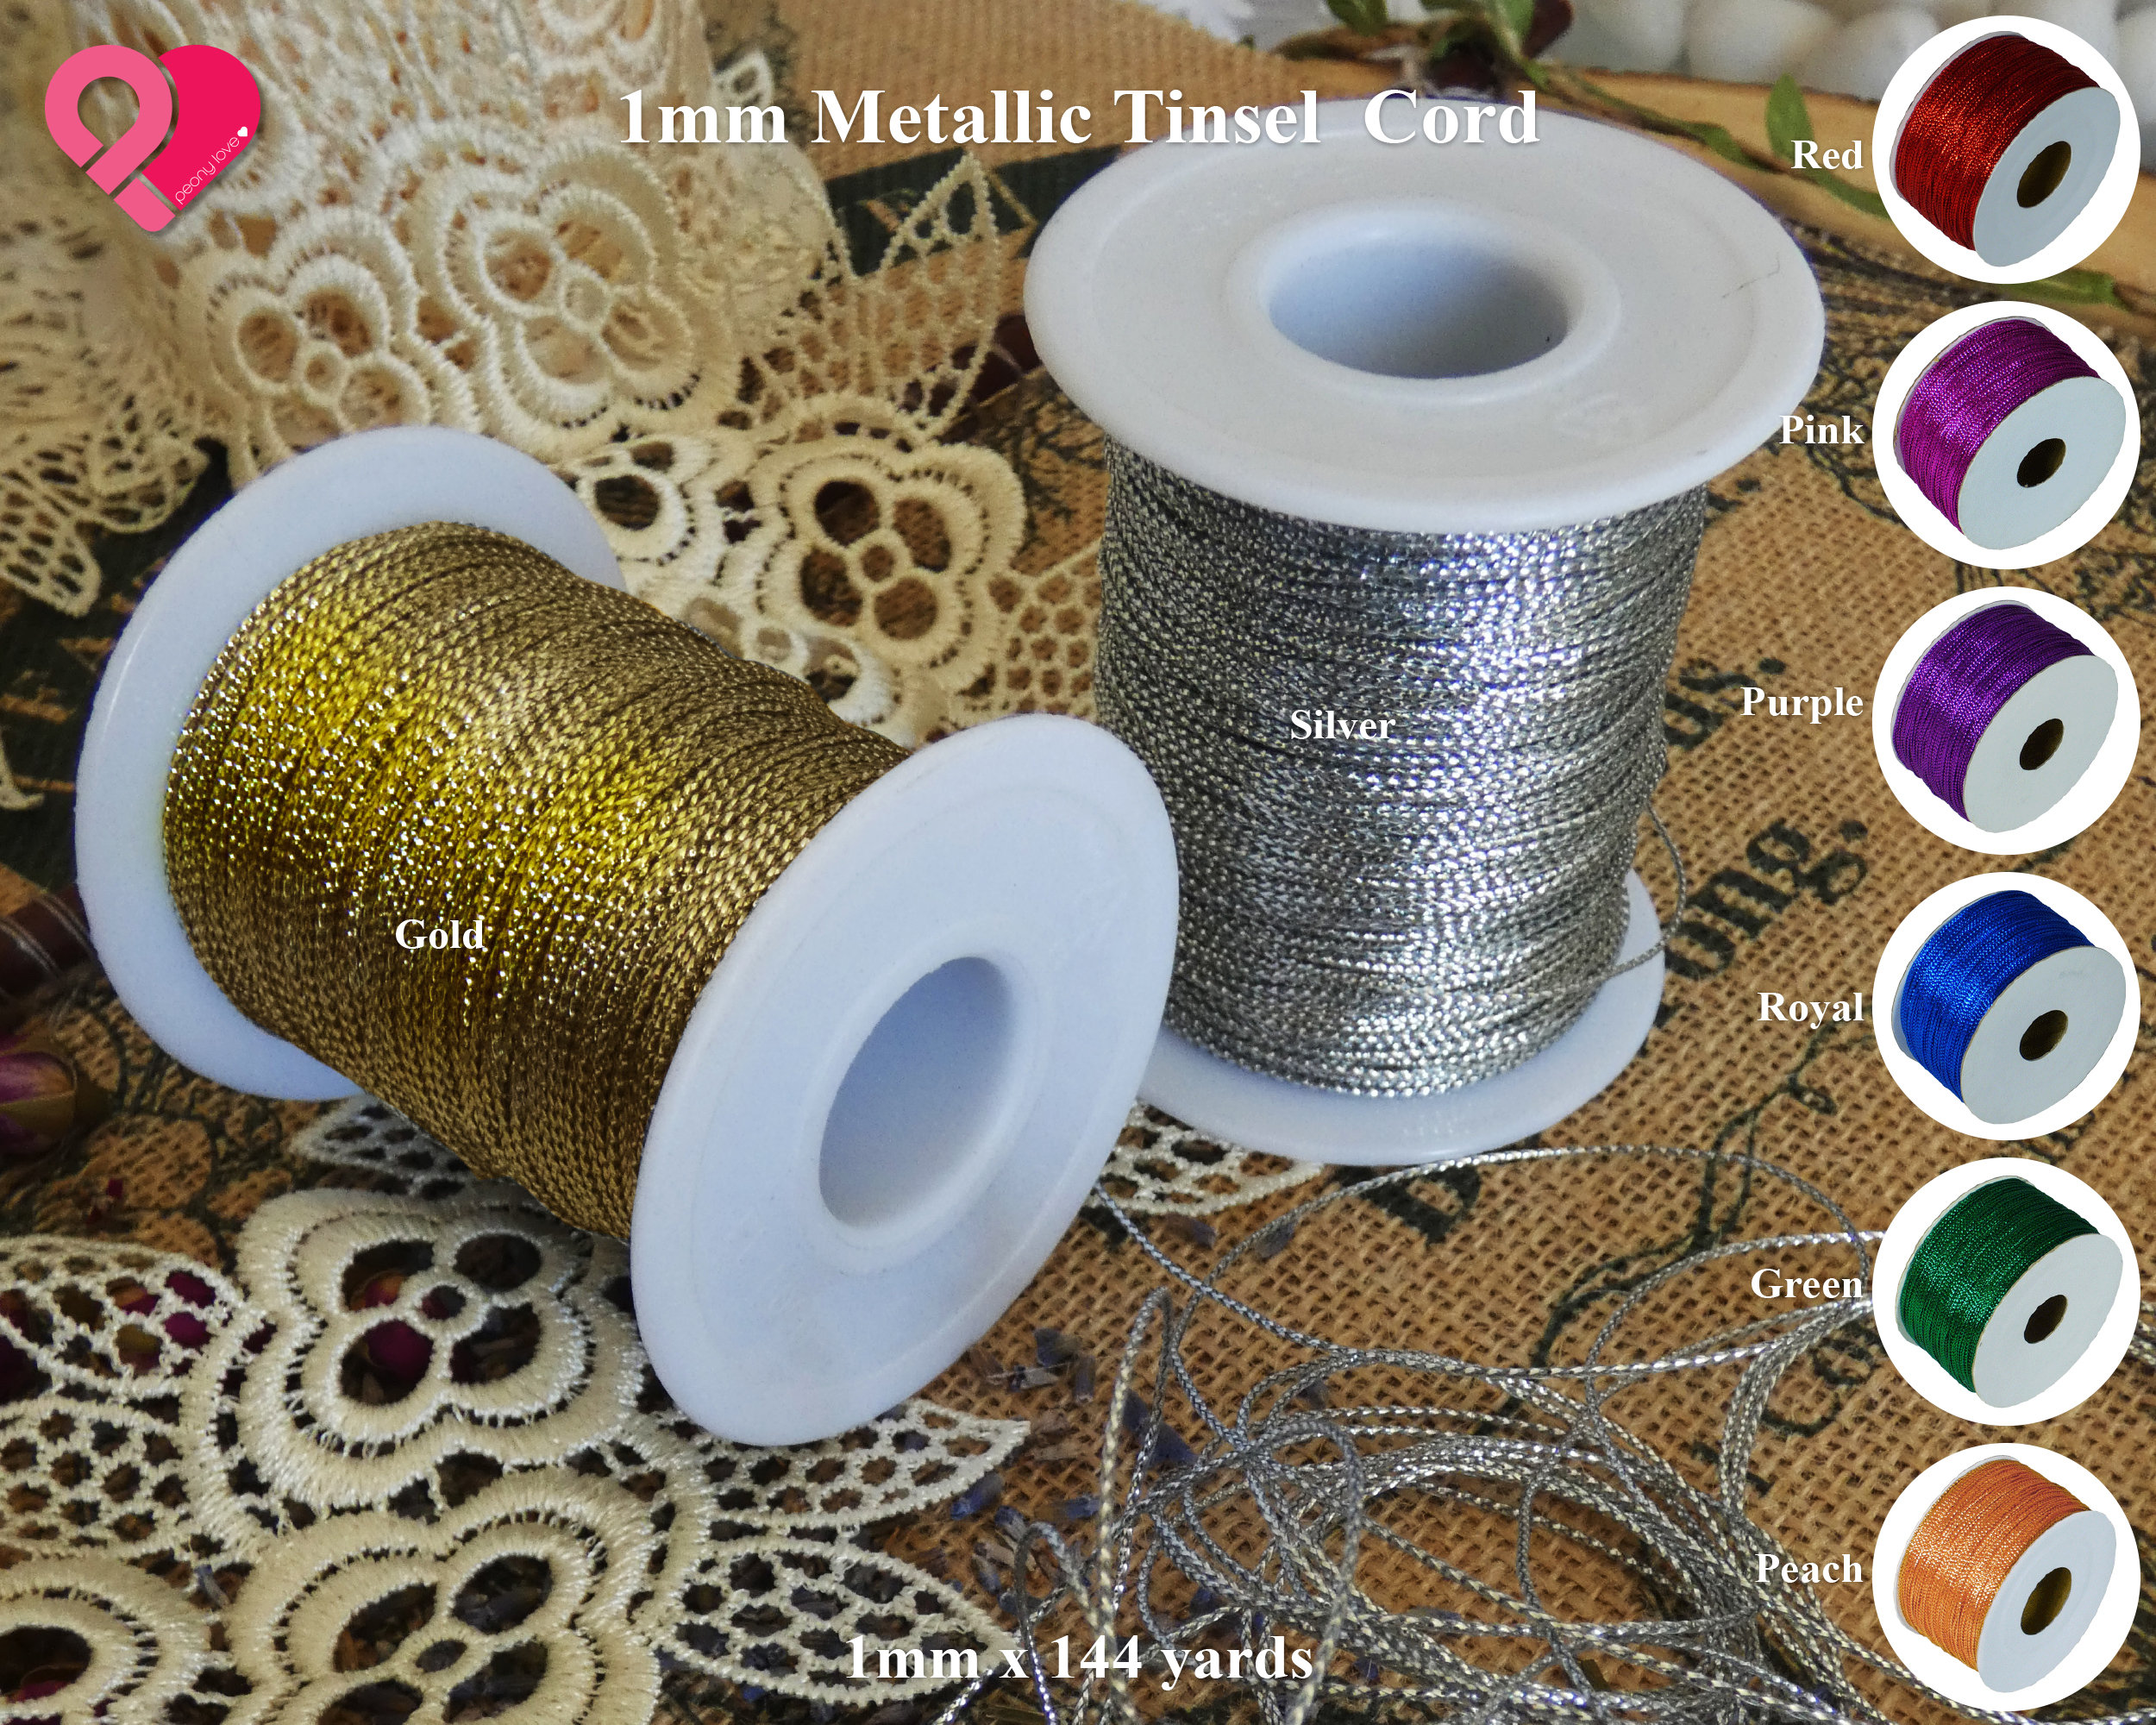 2mm Gold Silver Cord, Metallic Braided Cord, Lurex Cord, Christmas Craft,  Jewellery, Hair Crafts, Lurex Cord, Shiny Cord, Gold Cord, Silver 